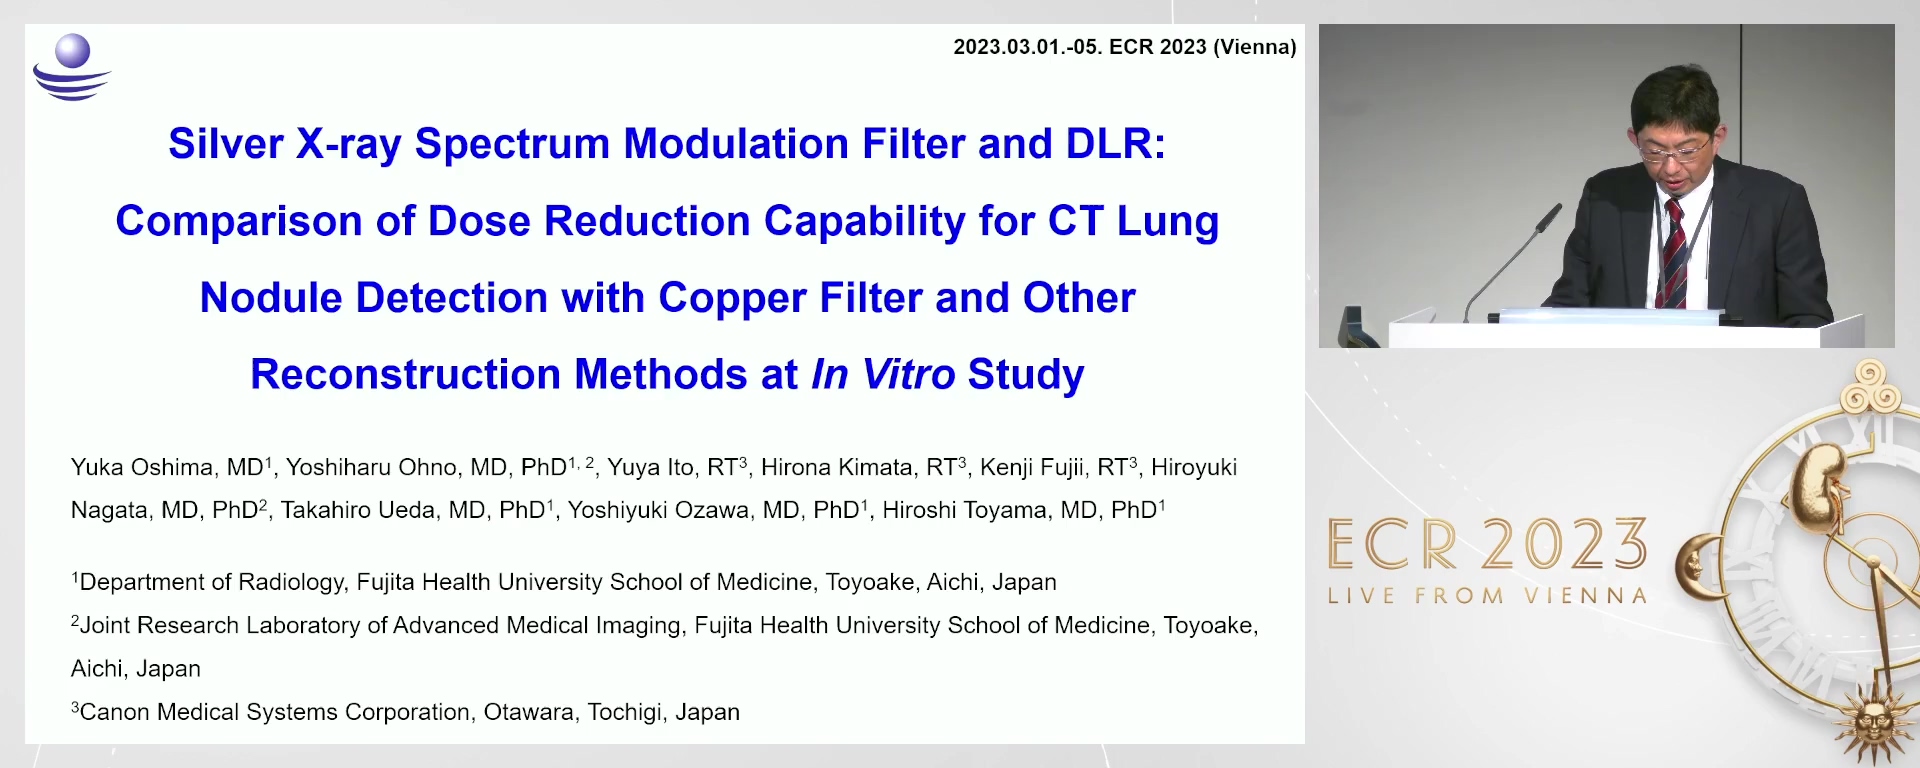 Silver x-ray spectrum modulation filter and DLR: comparison of dose reduction capability for CT lung nodule detection with copper filter and other reconstruction methods at in vitro study - Yoshiharu  Ohno, Toyoake / JP